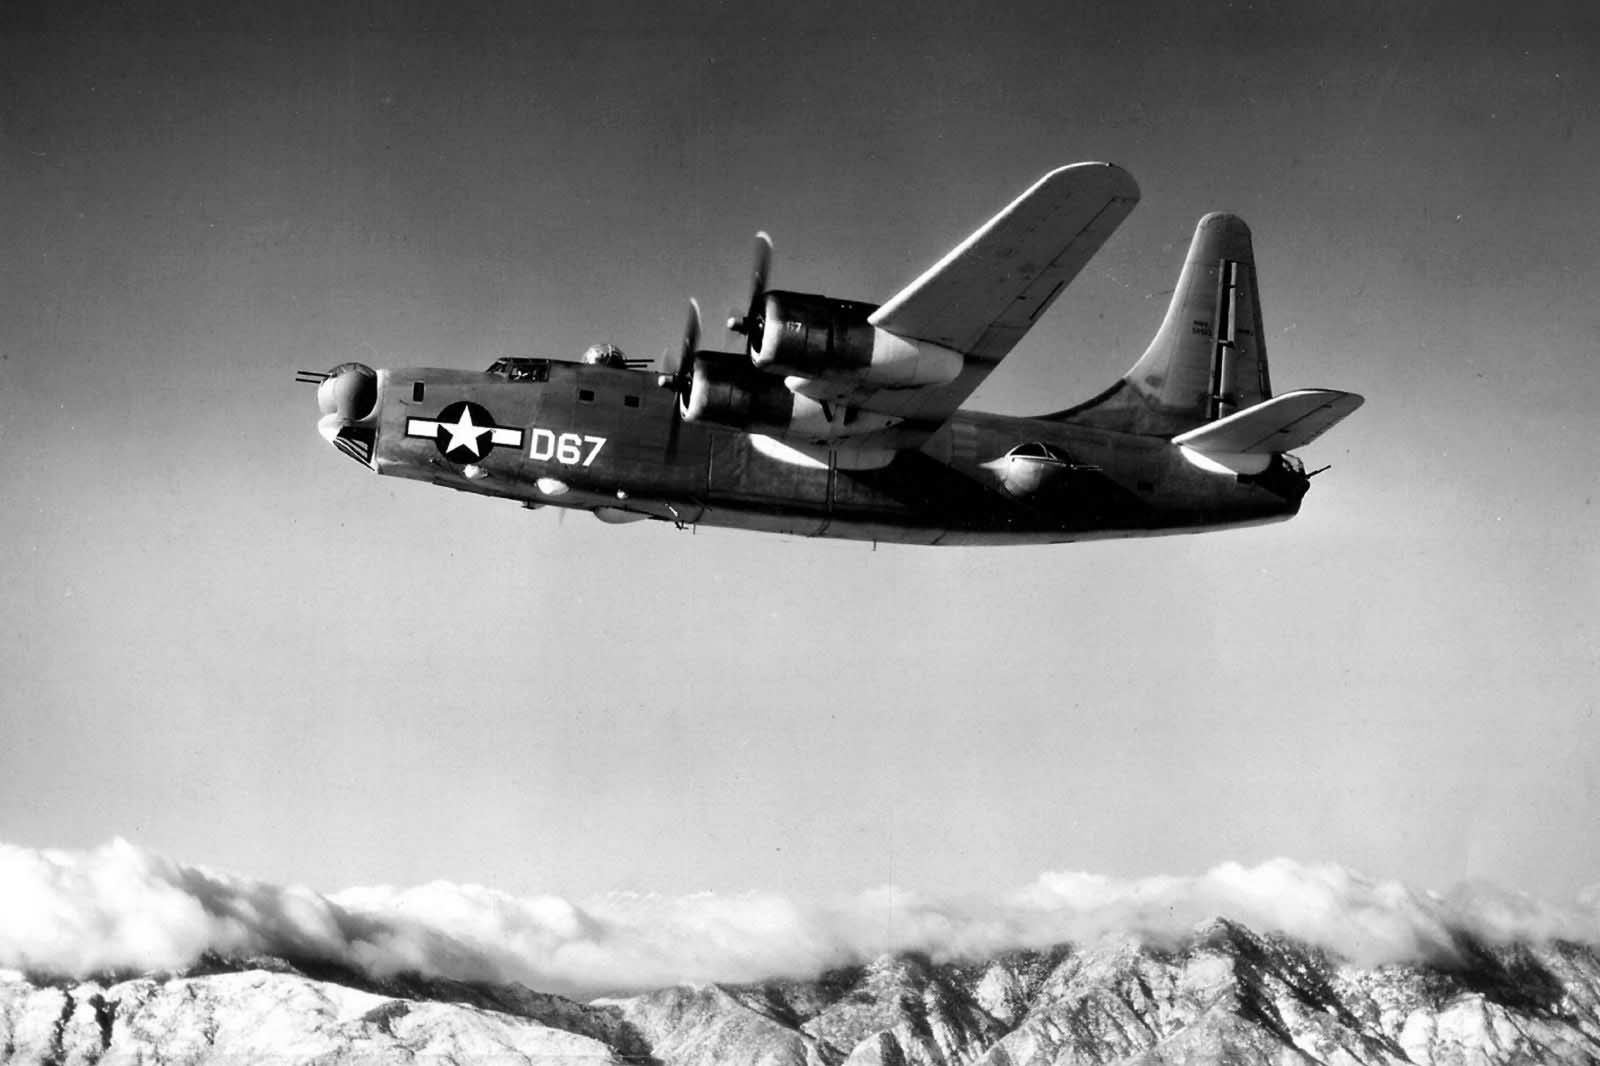 Consolidated PB4Y-2 Privateer D67 in flight, 1945 (2)